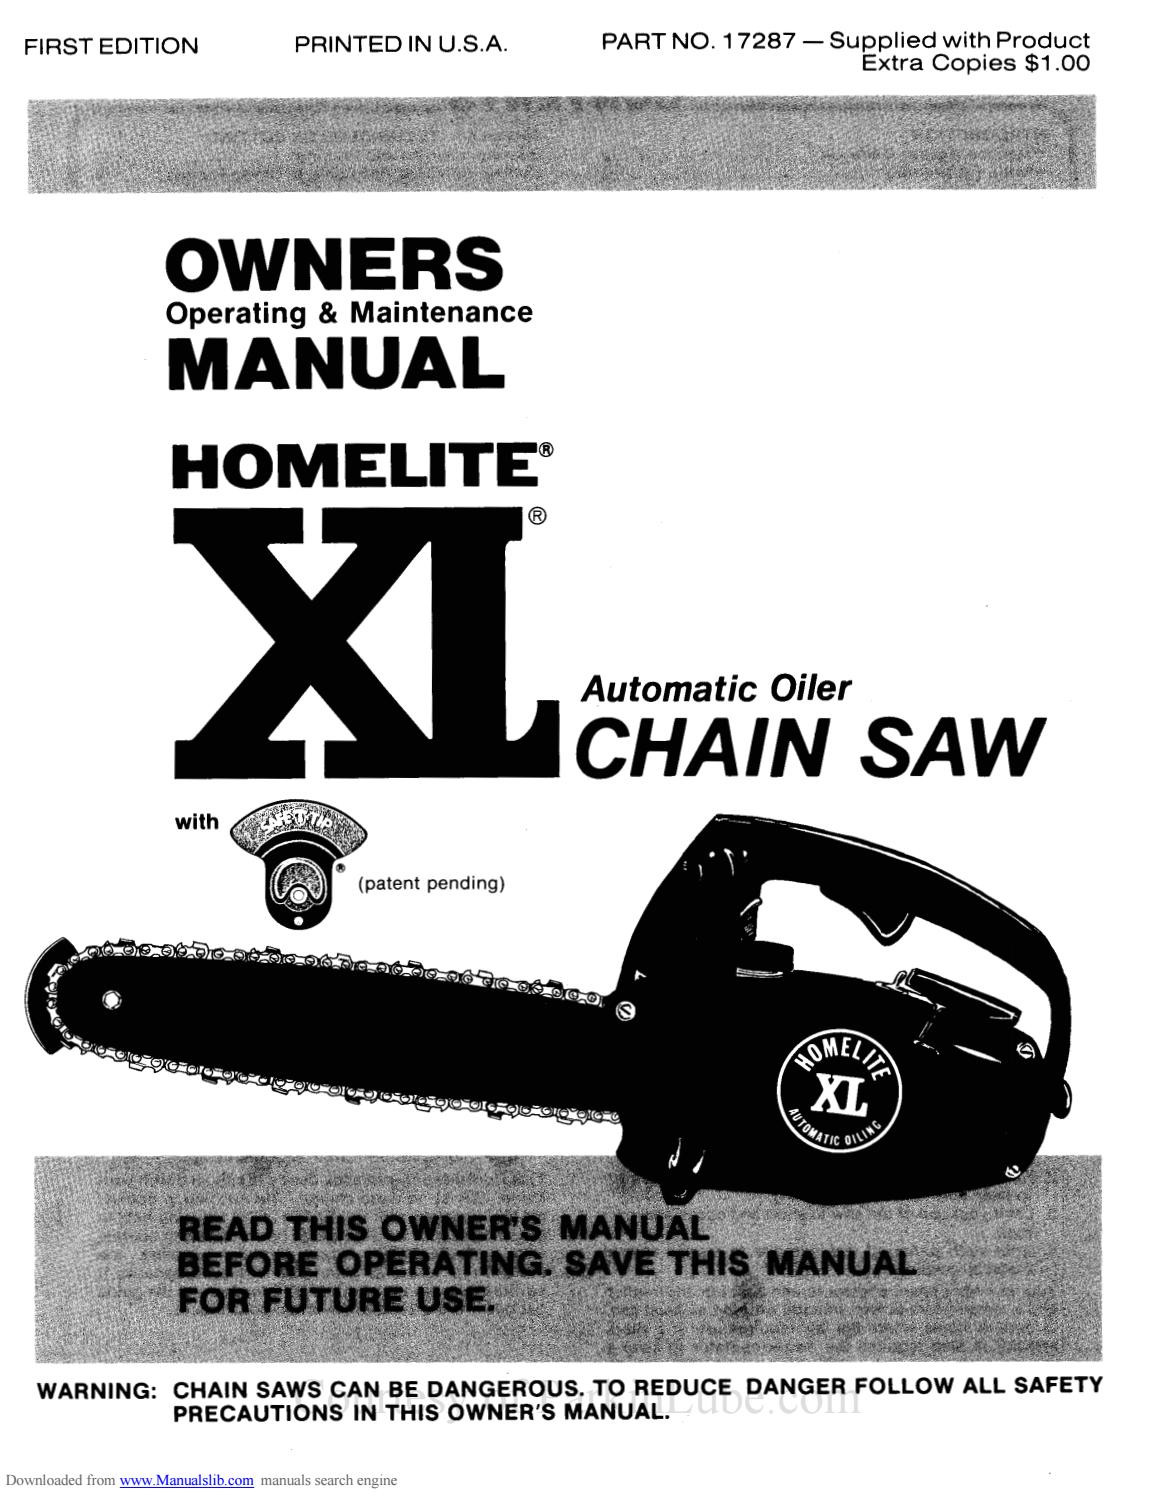 Homelite Chainsaw Wiring Diagram Homelite Xl Chainsaw – Owners Operating & Maintenance Manual by … Of Homelite Chainsaw Wiring Diagram